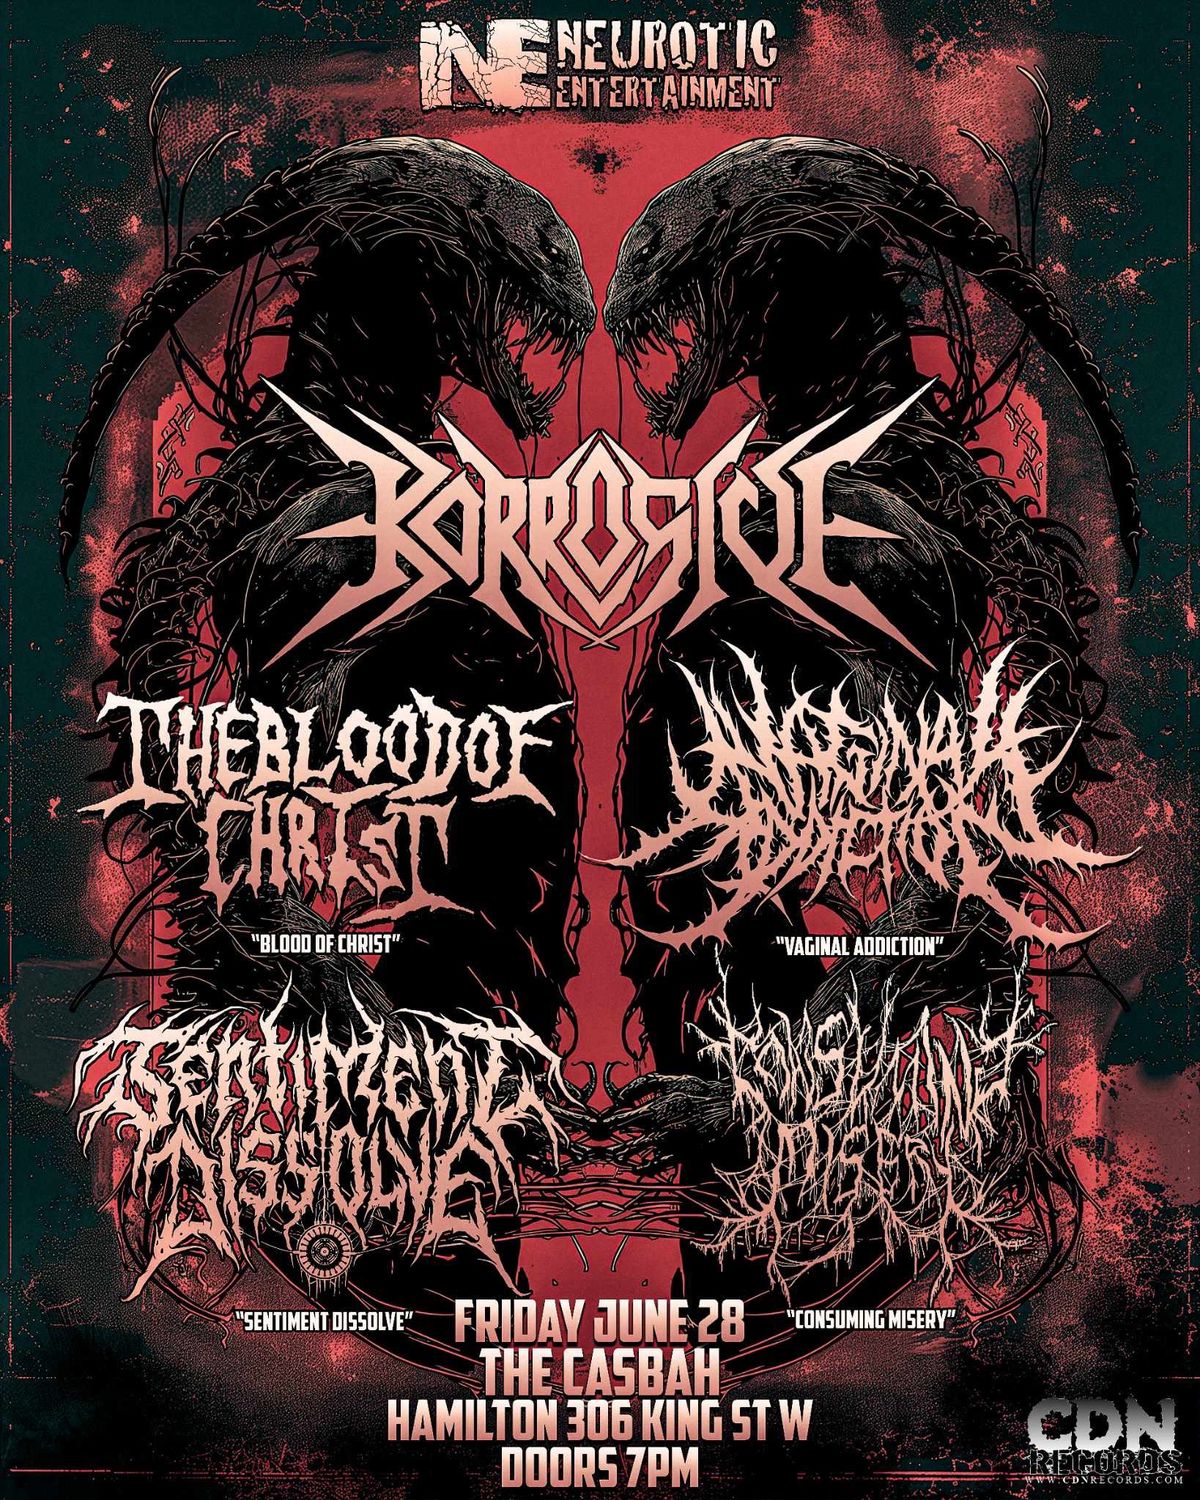 Korrosive, The Blood of Christ, Vaginal Addiction, Sentiment Dissolve & Consuming Misery